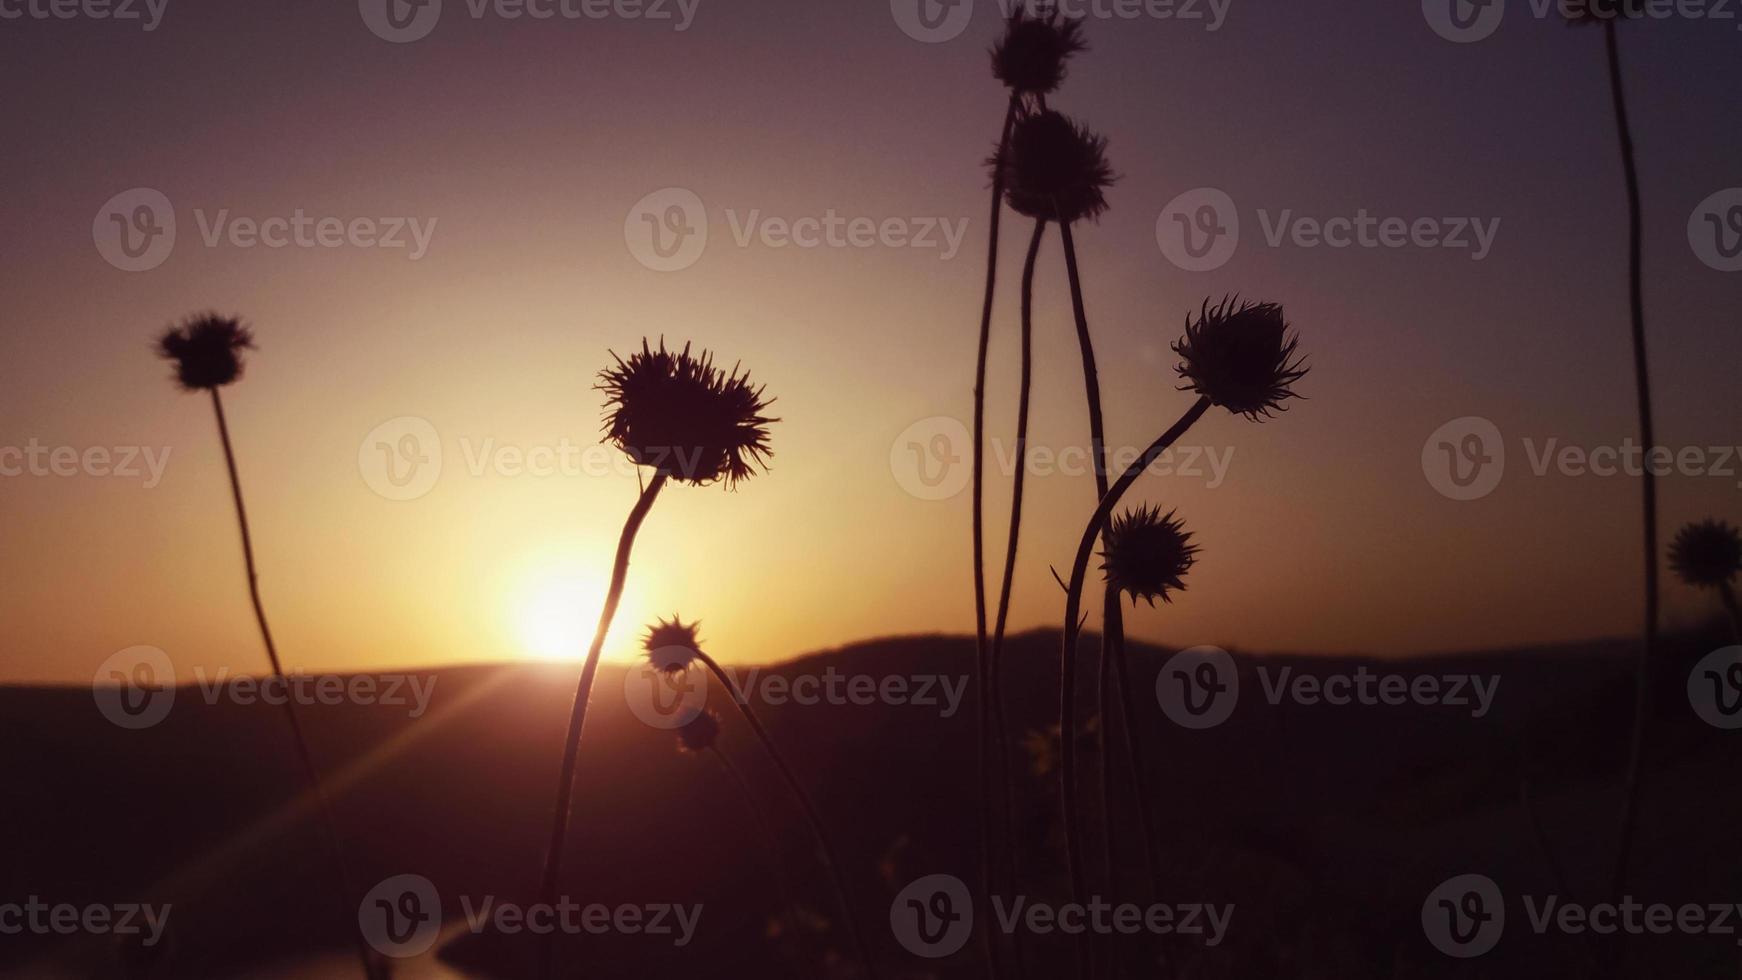 Thistle flowers silhouettes against evening sky at sunset photo